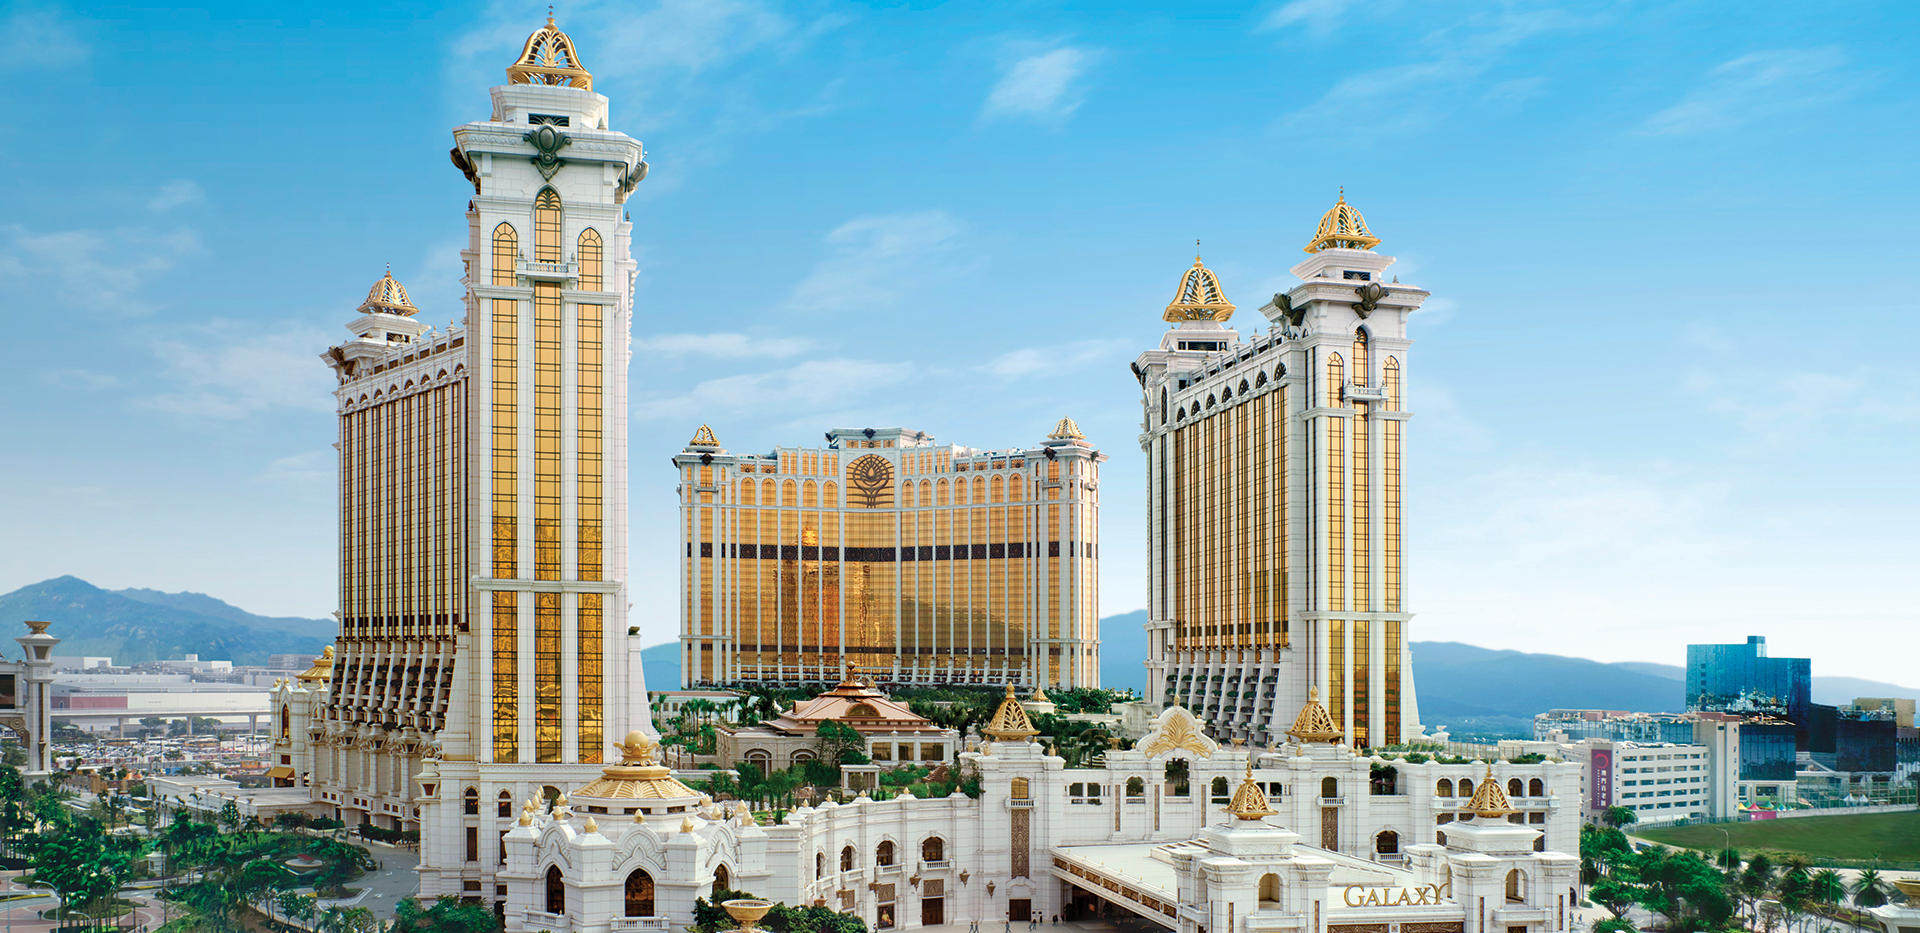 Galaxy Macau is one of the 22 top-rated hotels in Macau, according to the Forbes Travel Guide 2023. Photo: Galaxy Macau